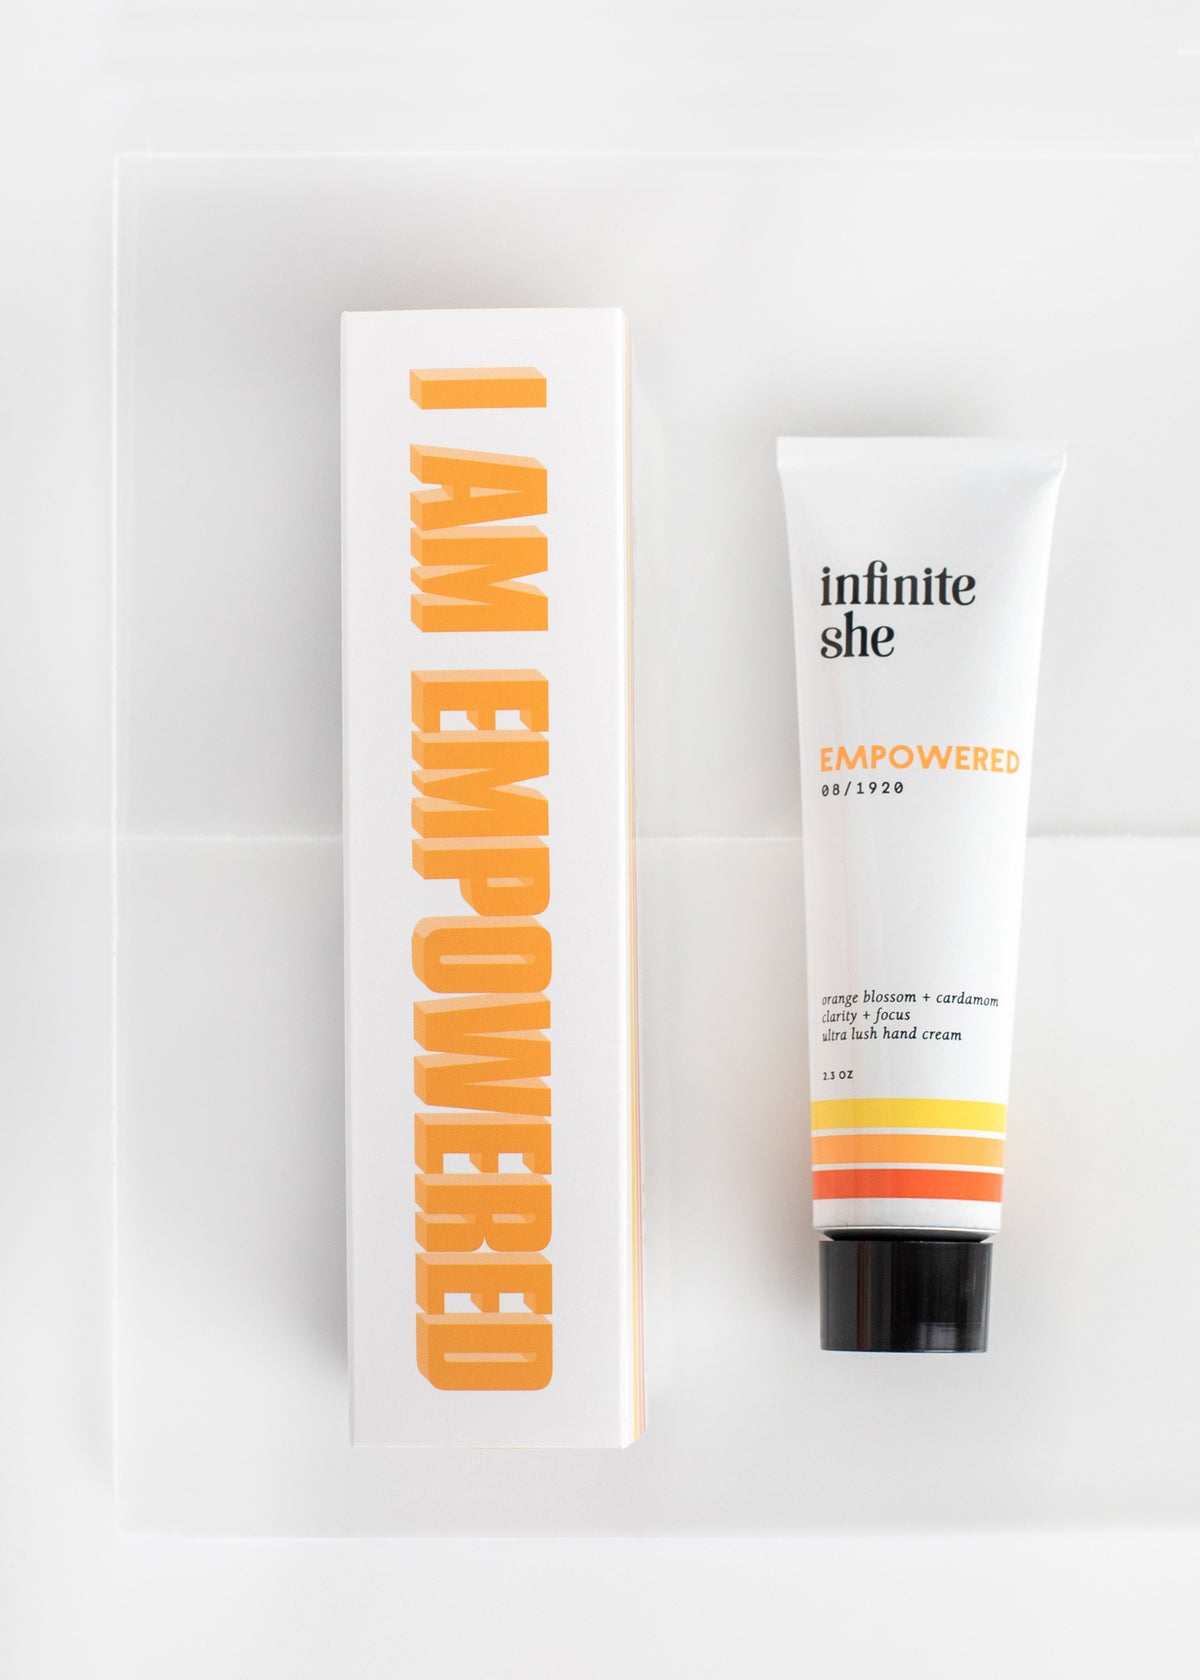 Orange and white packaging marked "i am empowered" alongside a tube of vegan hand cream labeled "Infinite She Empowered Ultra Lush Hand Cream" by Margot Elena on a clean, bright background.